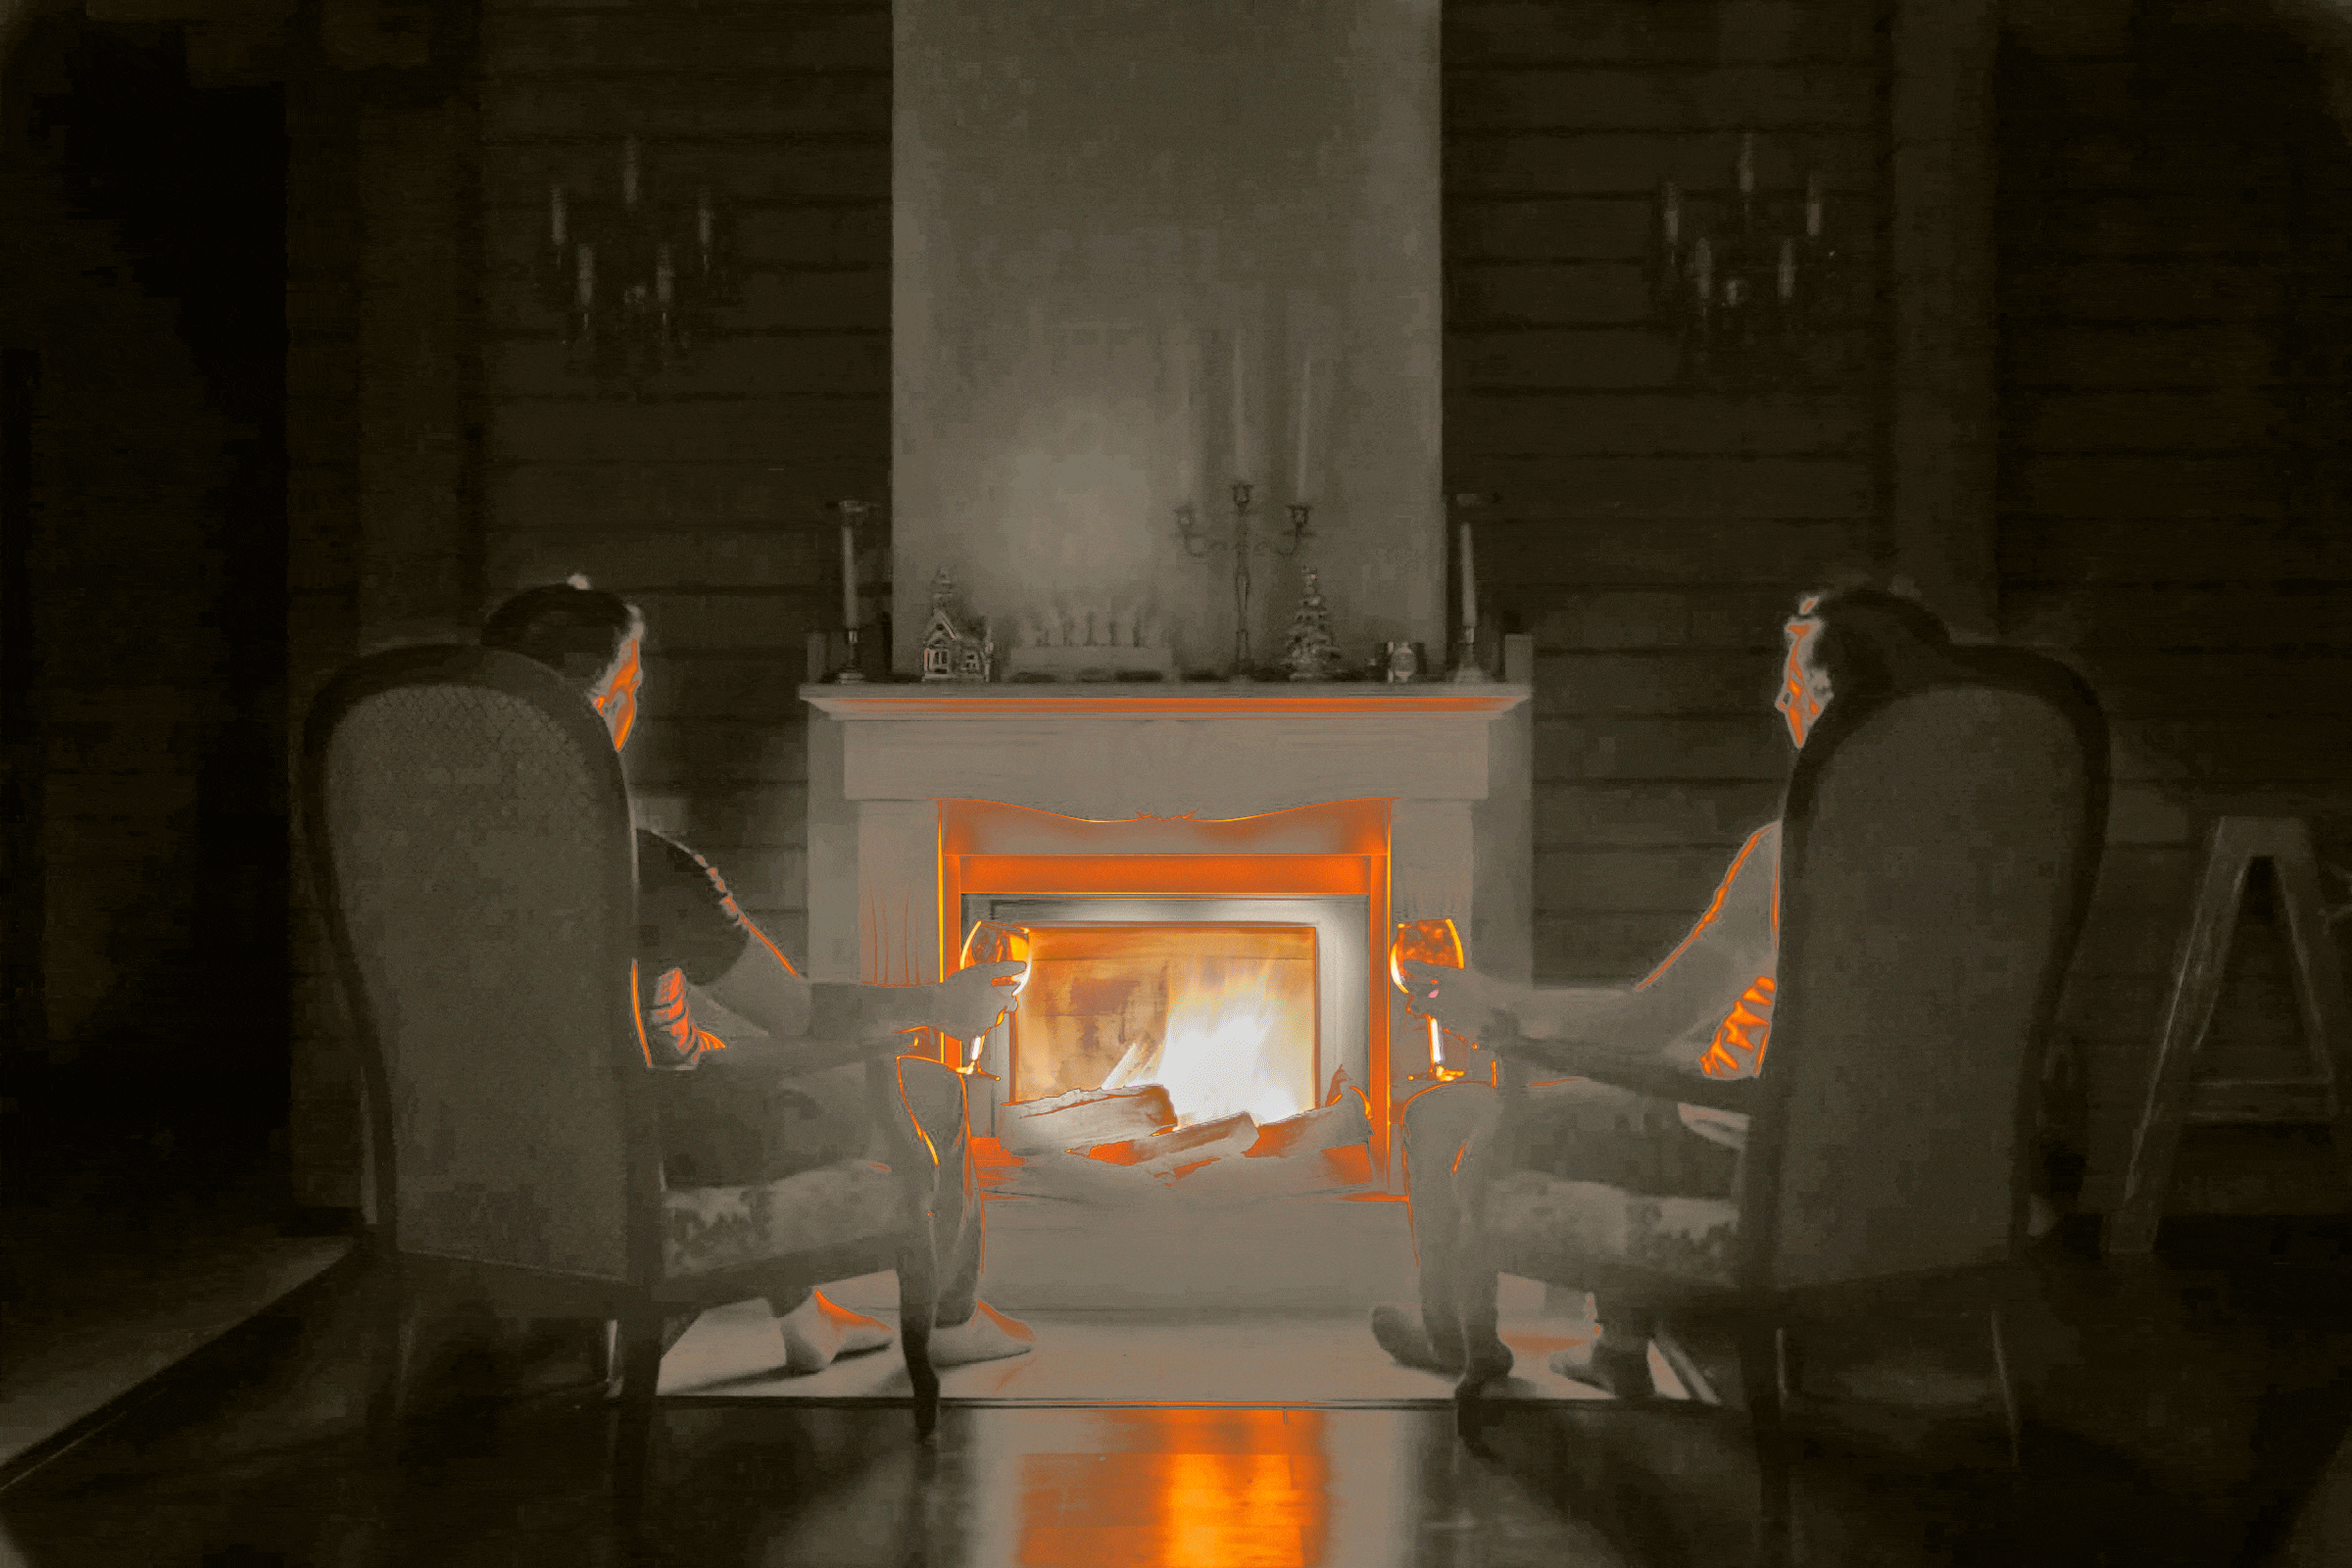 People seated around glowing fireplace